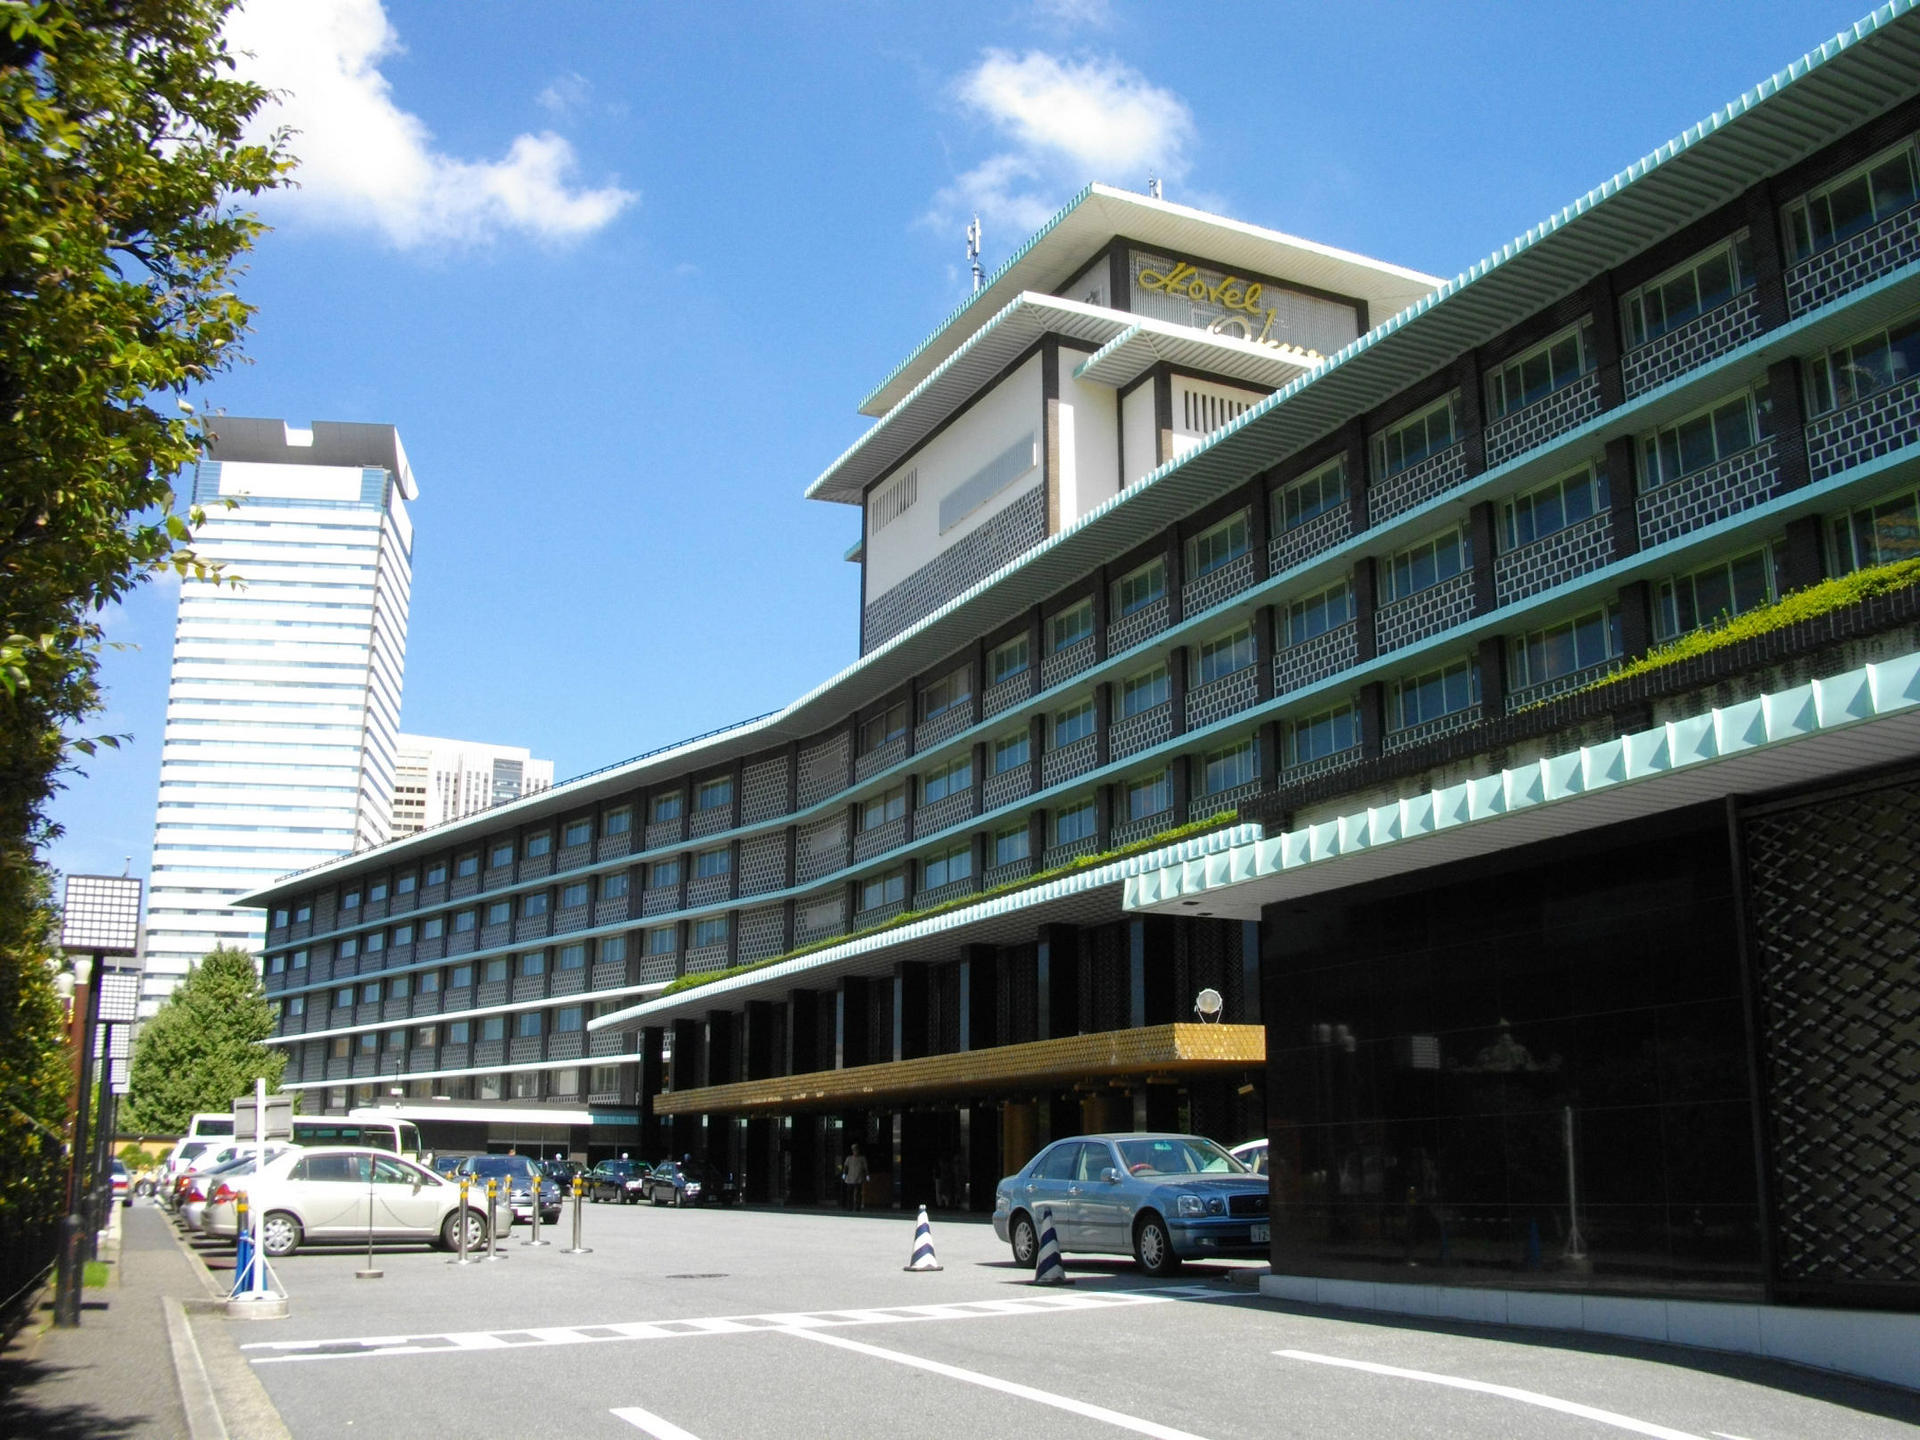 Tyler Brule is challenging the decision to destroy the main hotel building of the Hotel Okura Tokyo in favour of a 38-storey steel-and-glass tower expansion. Photo: SCMP Pictures